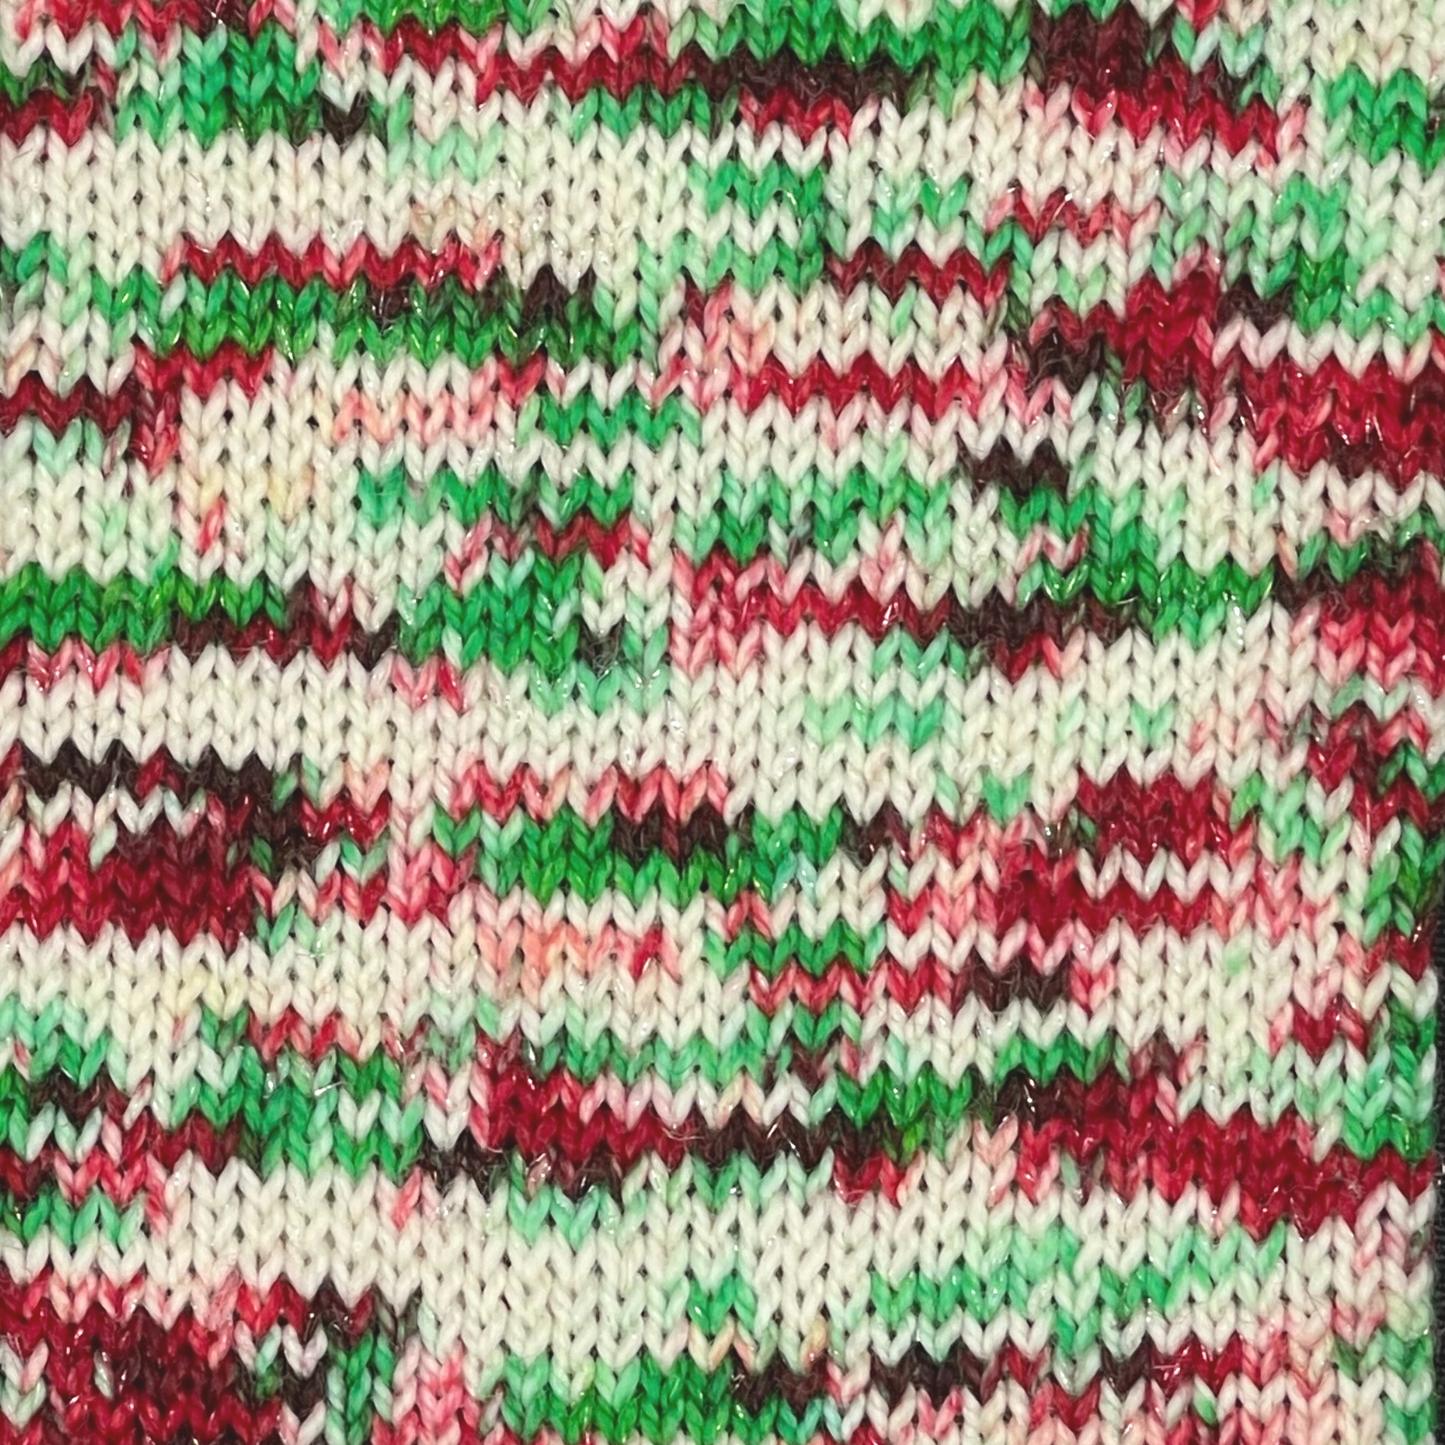 Simply Christmas - A variegated hand dyed yarn